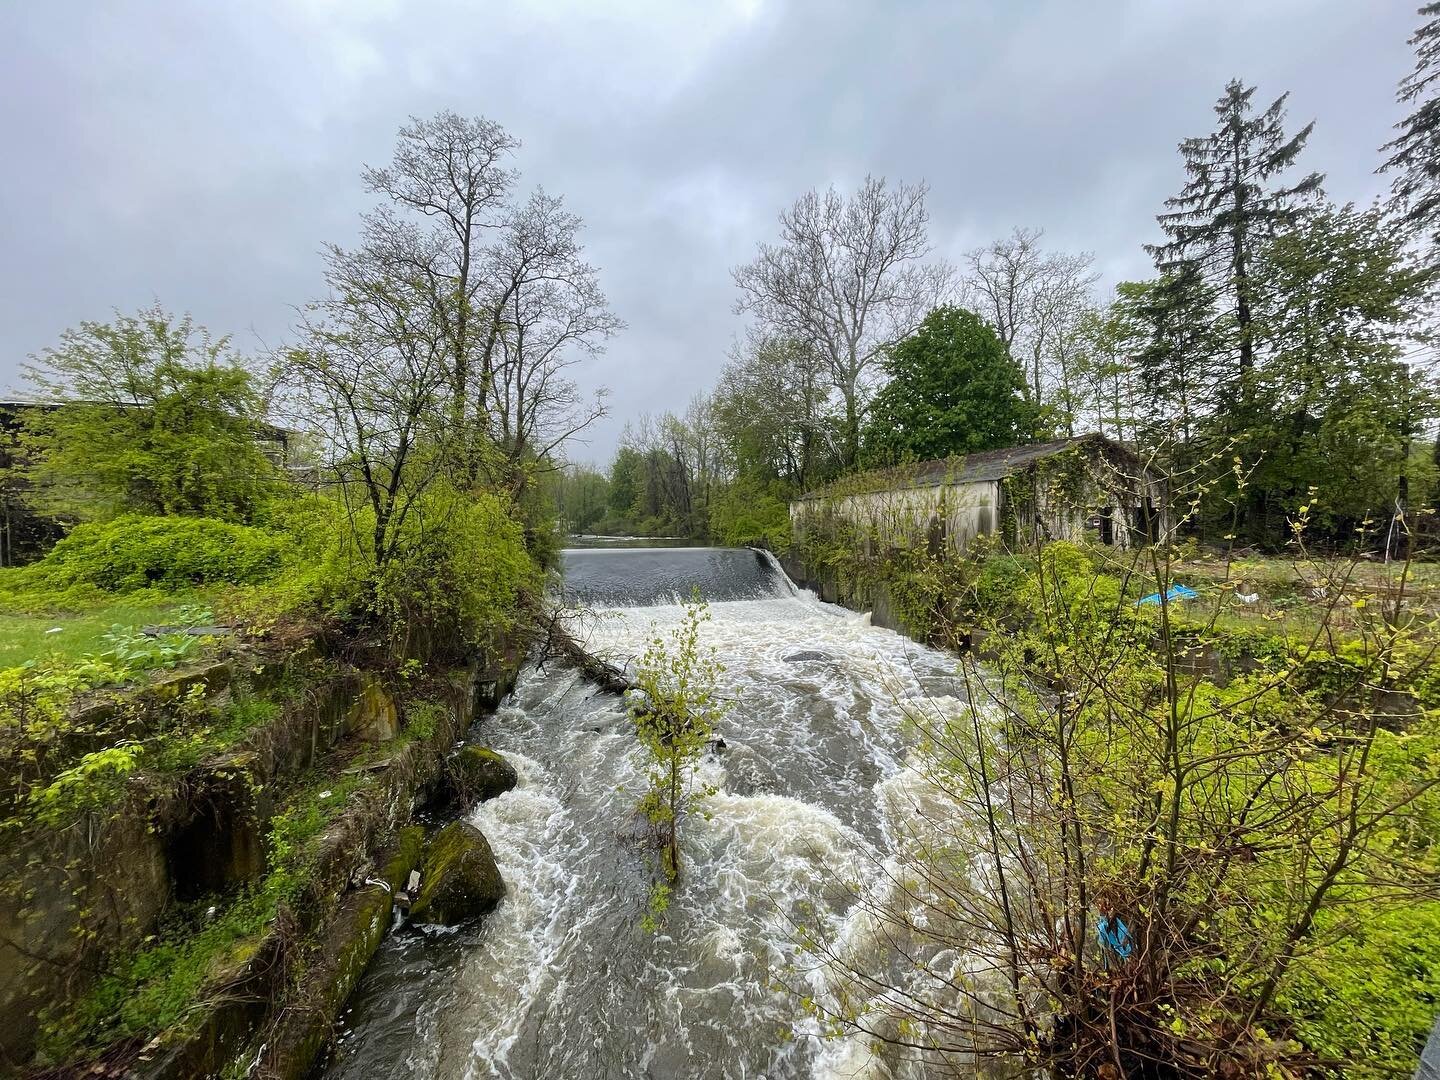 #wisnerave #newburghny where the #quassaickcreek flows into a #culvert directed below ground and under the building where an #industrialmill existed. #daylightingcreeks is the future #buildmorehabitats #overflowing in the rain